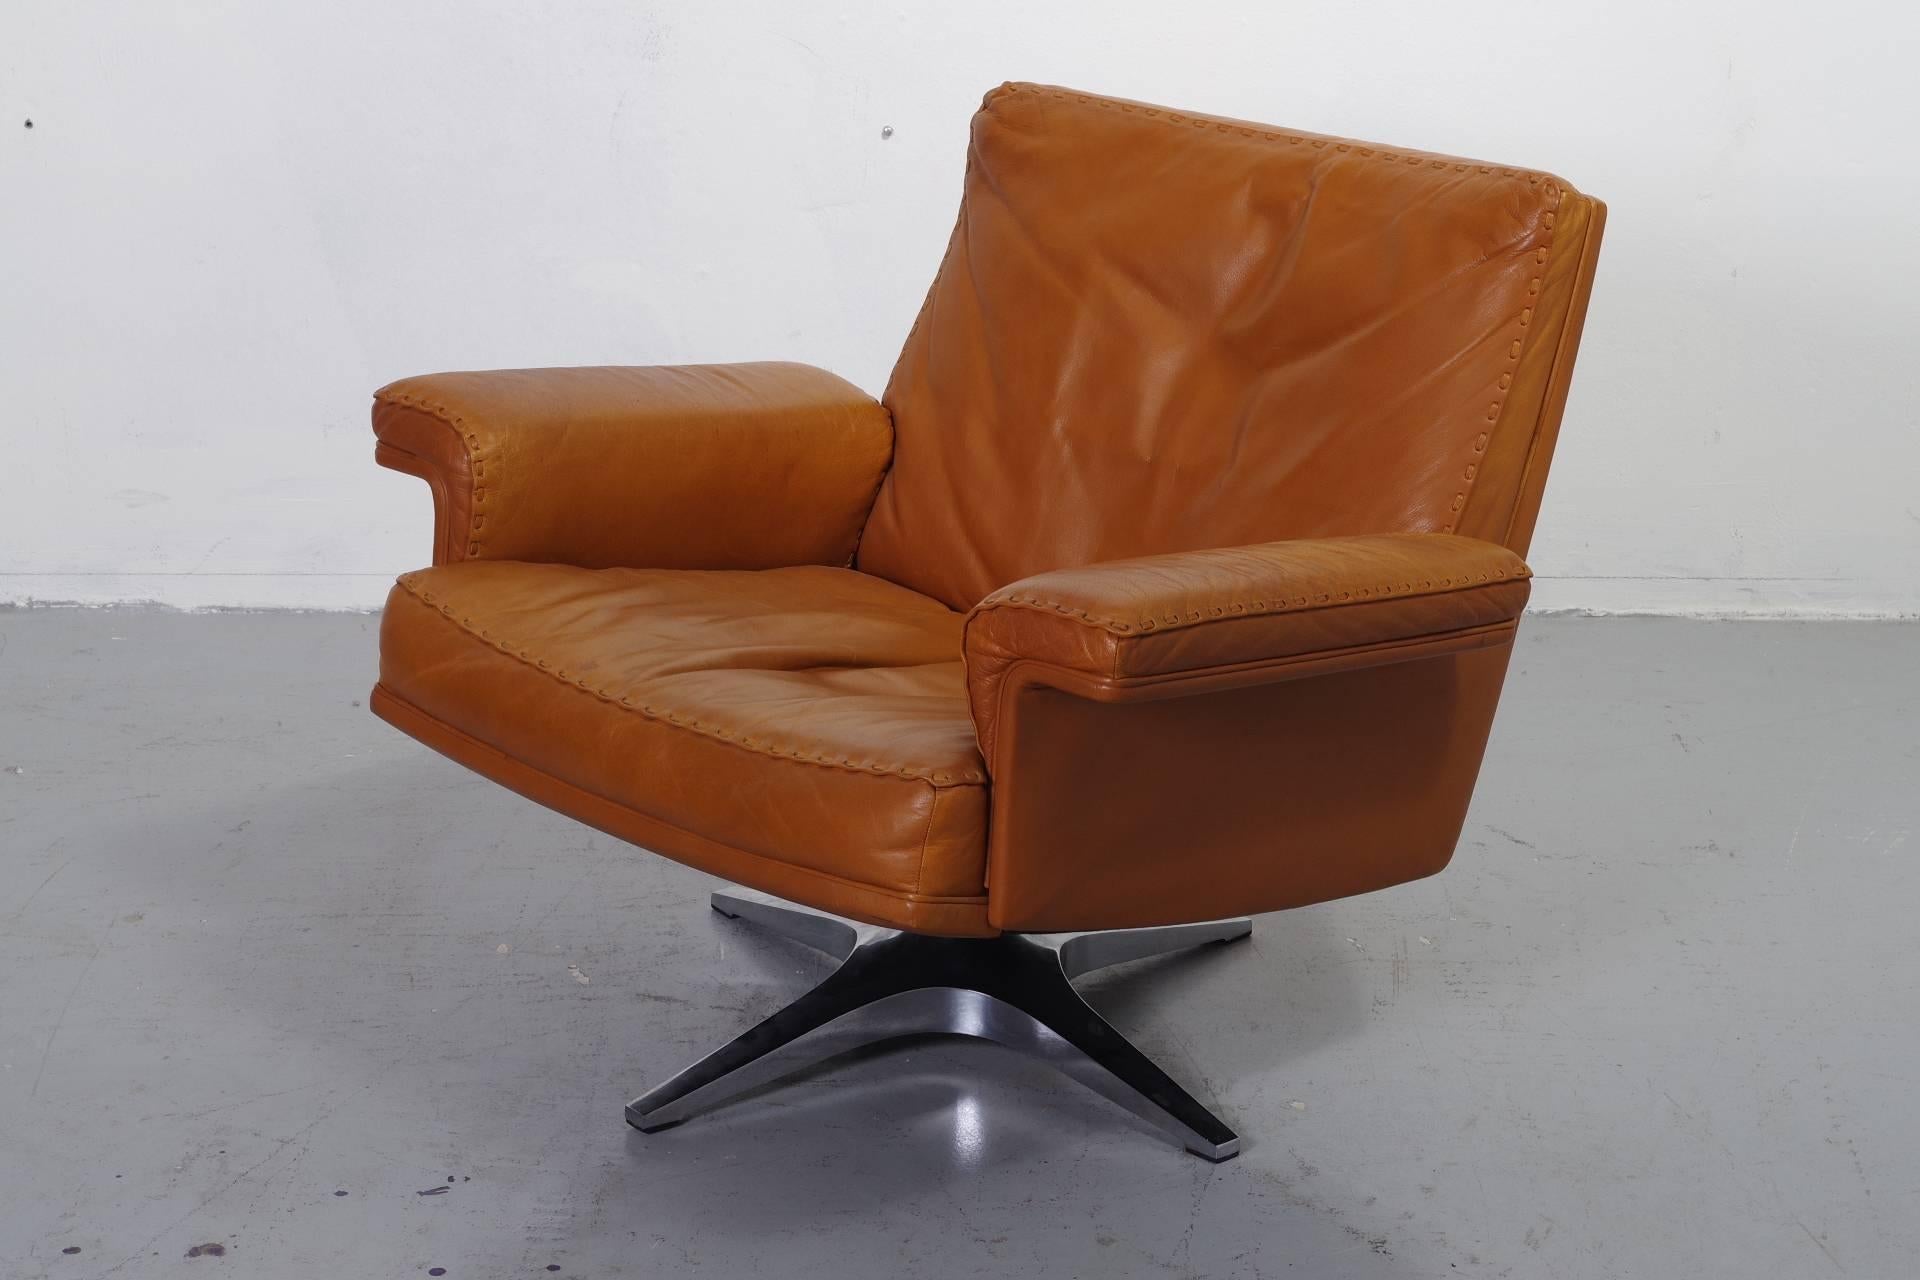 Foam De Sede Ds31 Lowback Swivel Club Chair (one available) For Sale